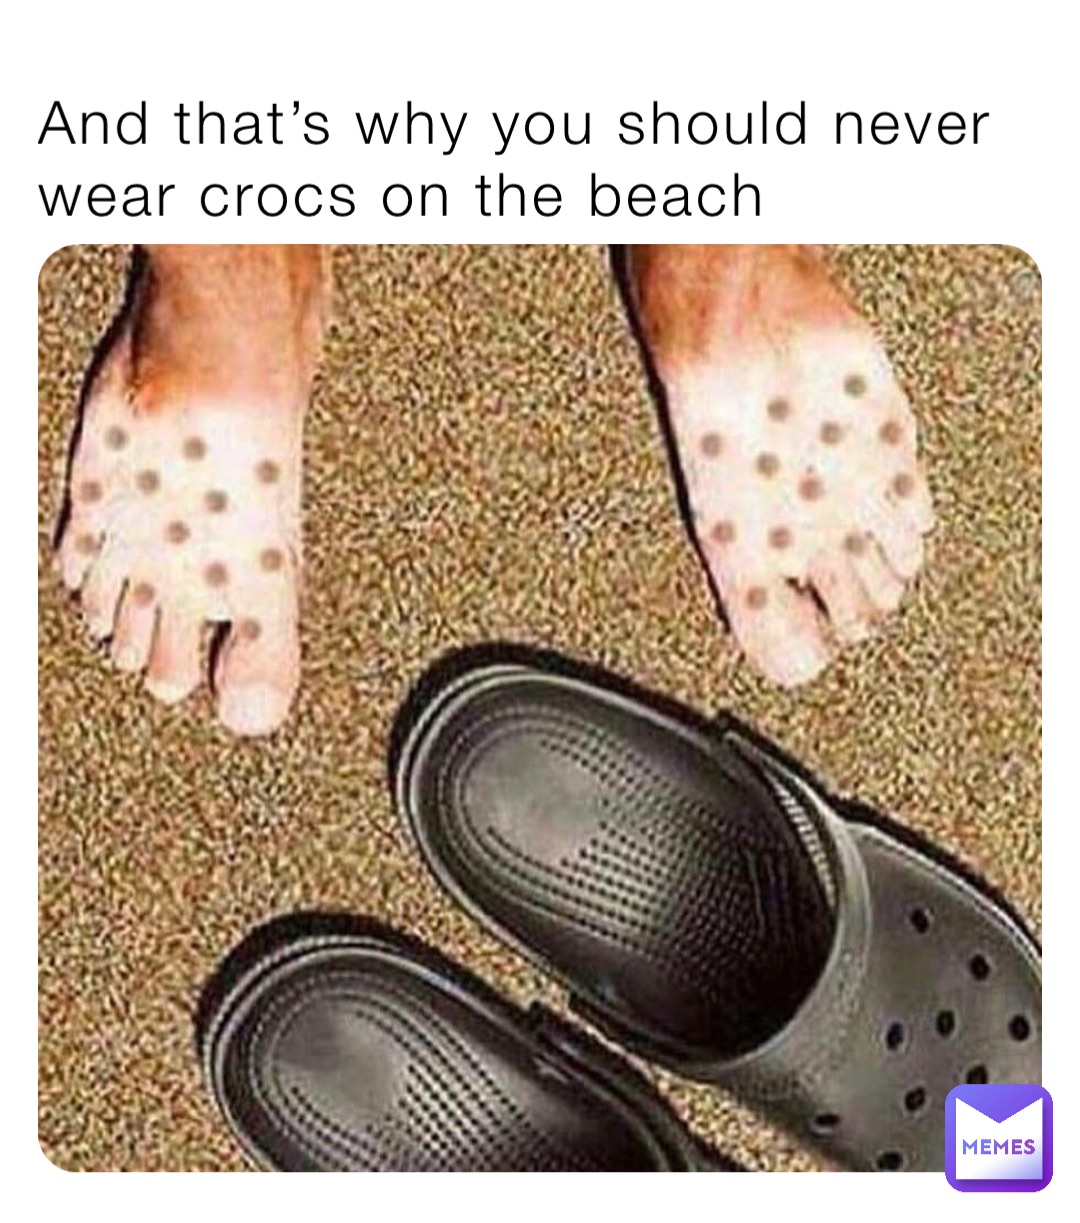 And that's why you should never wear crocs on the beach | @ImaHillbilly |  Memes